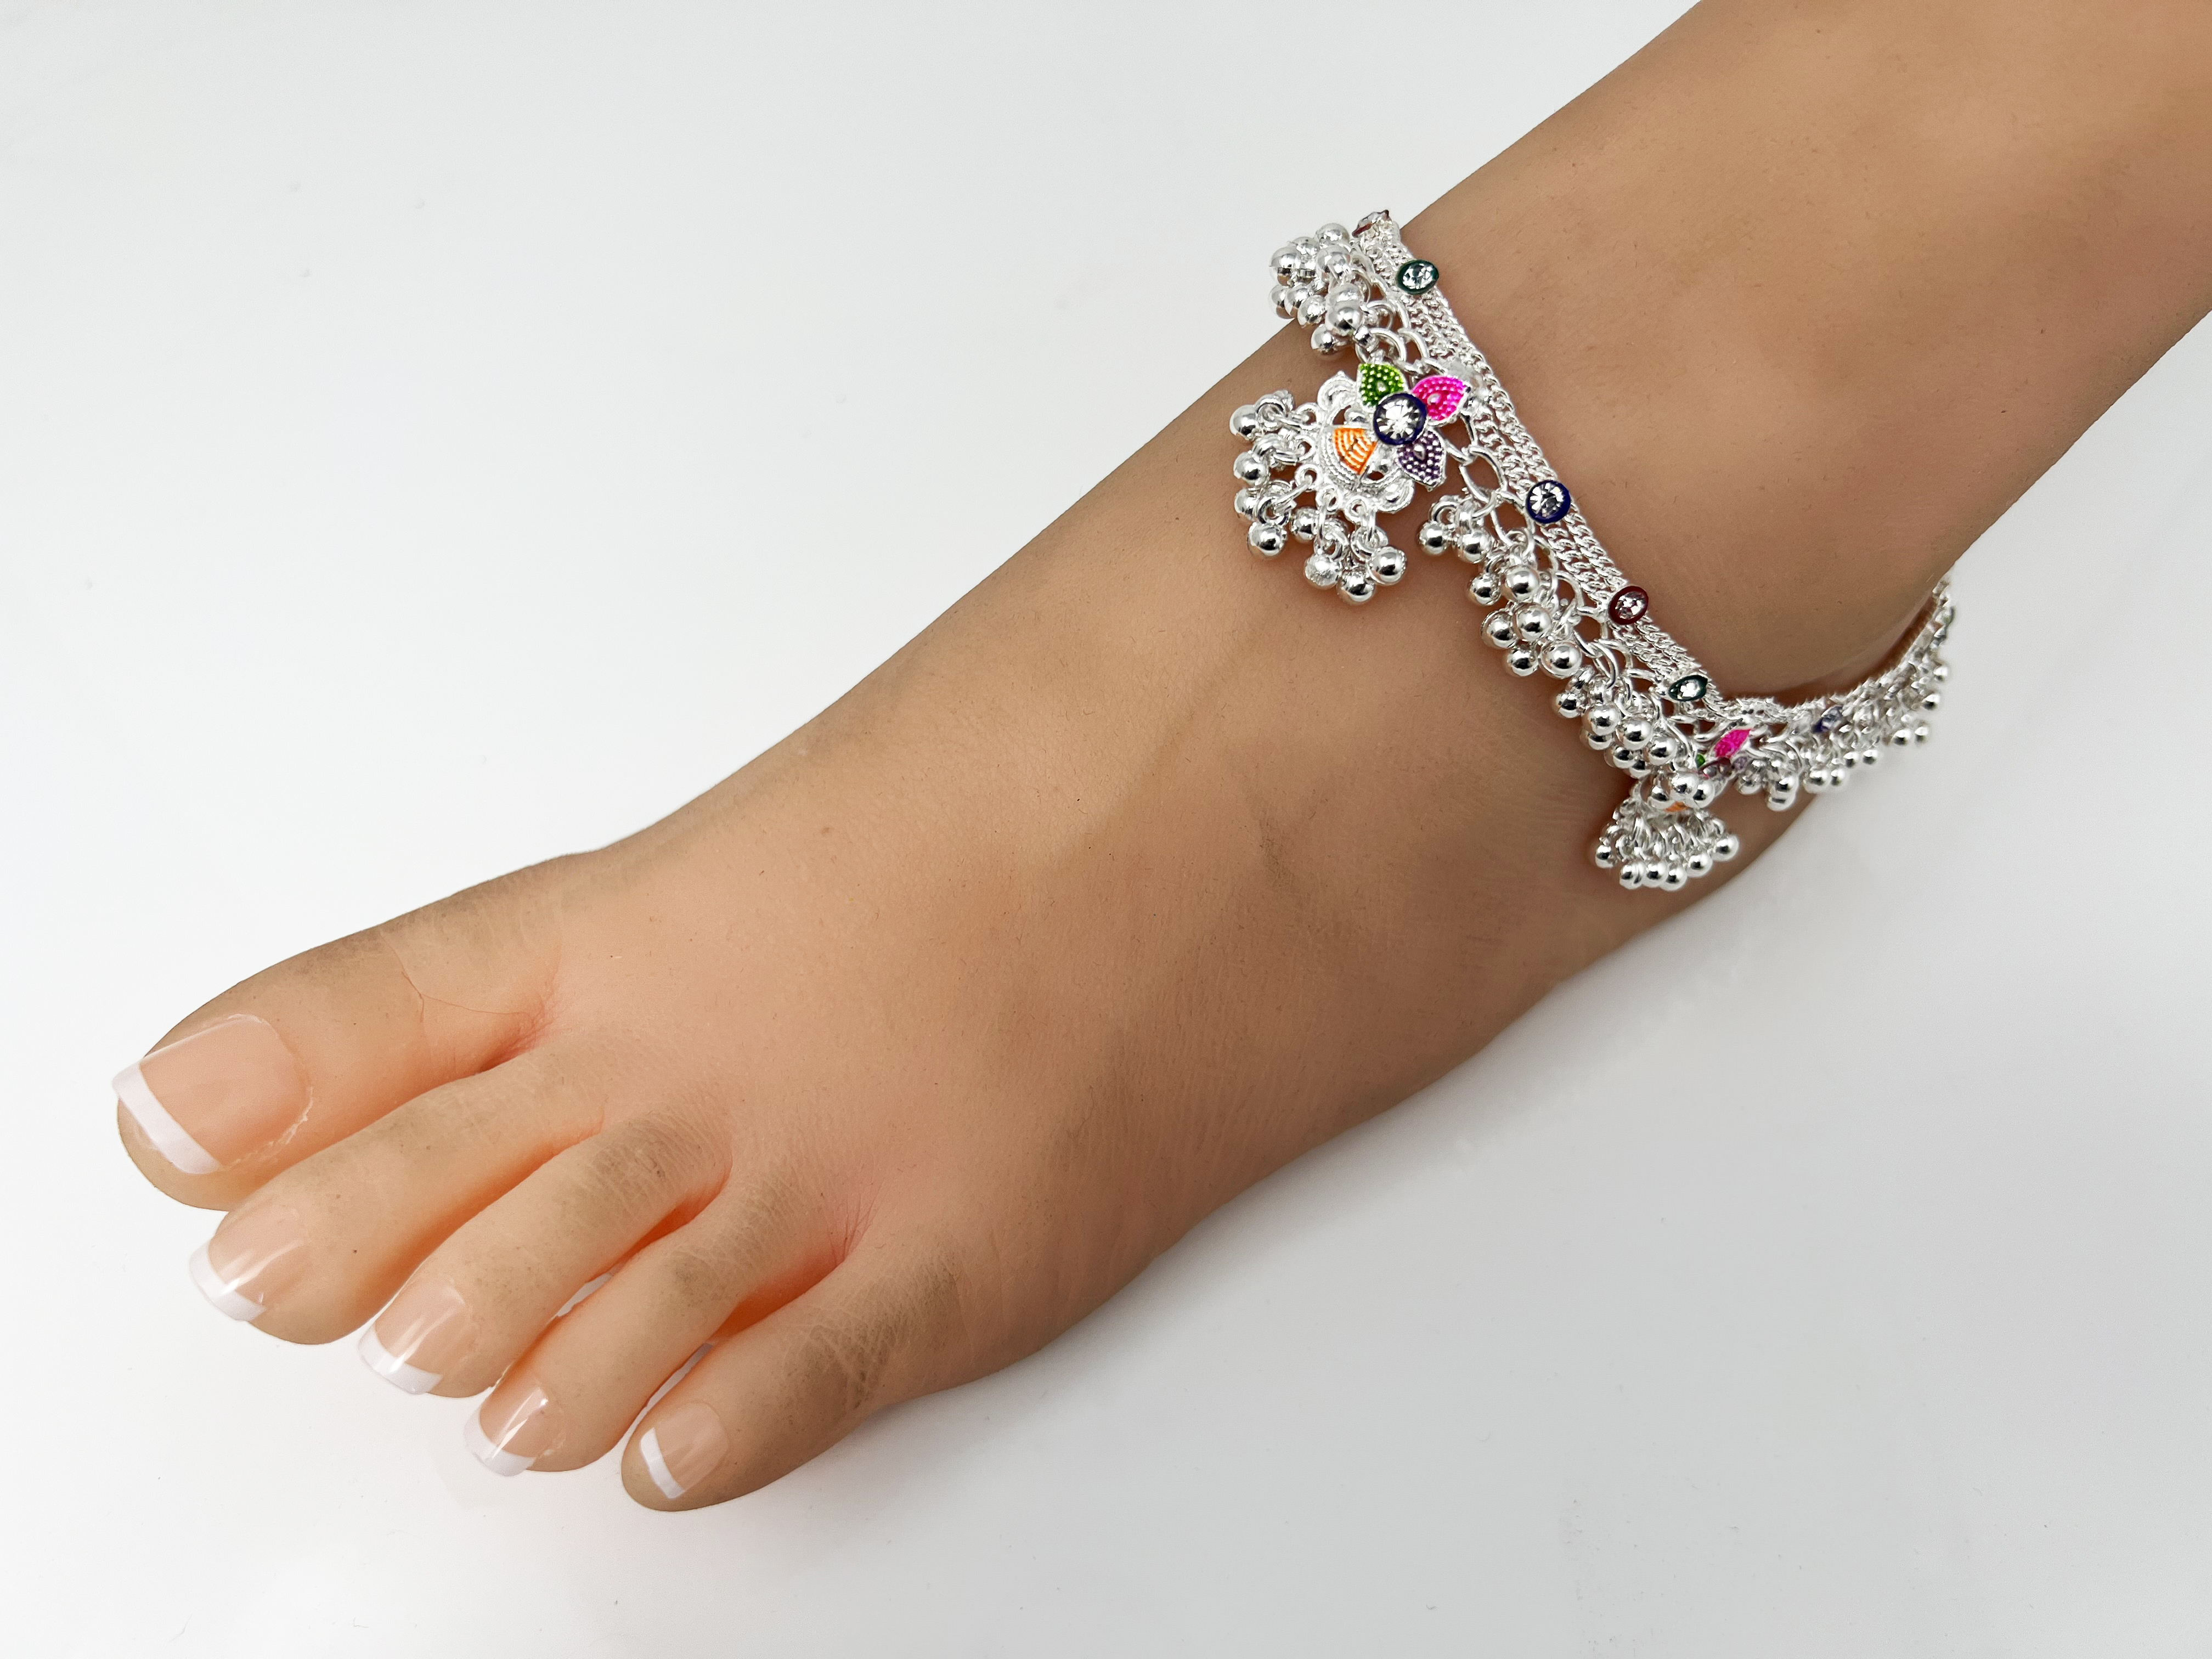 A7 Pair of Anklets Payal with Rhinestone and meenakari  for Legs